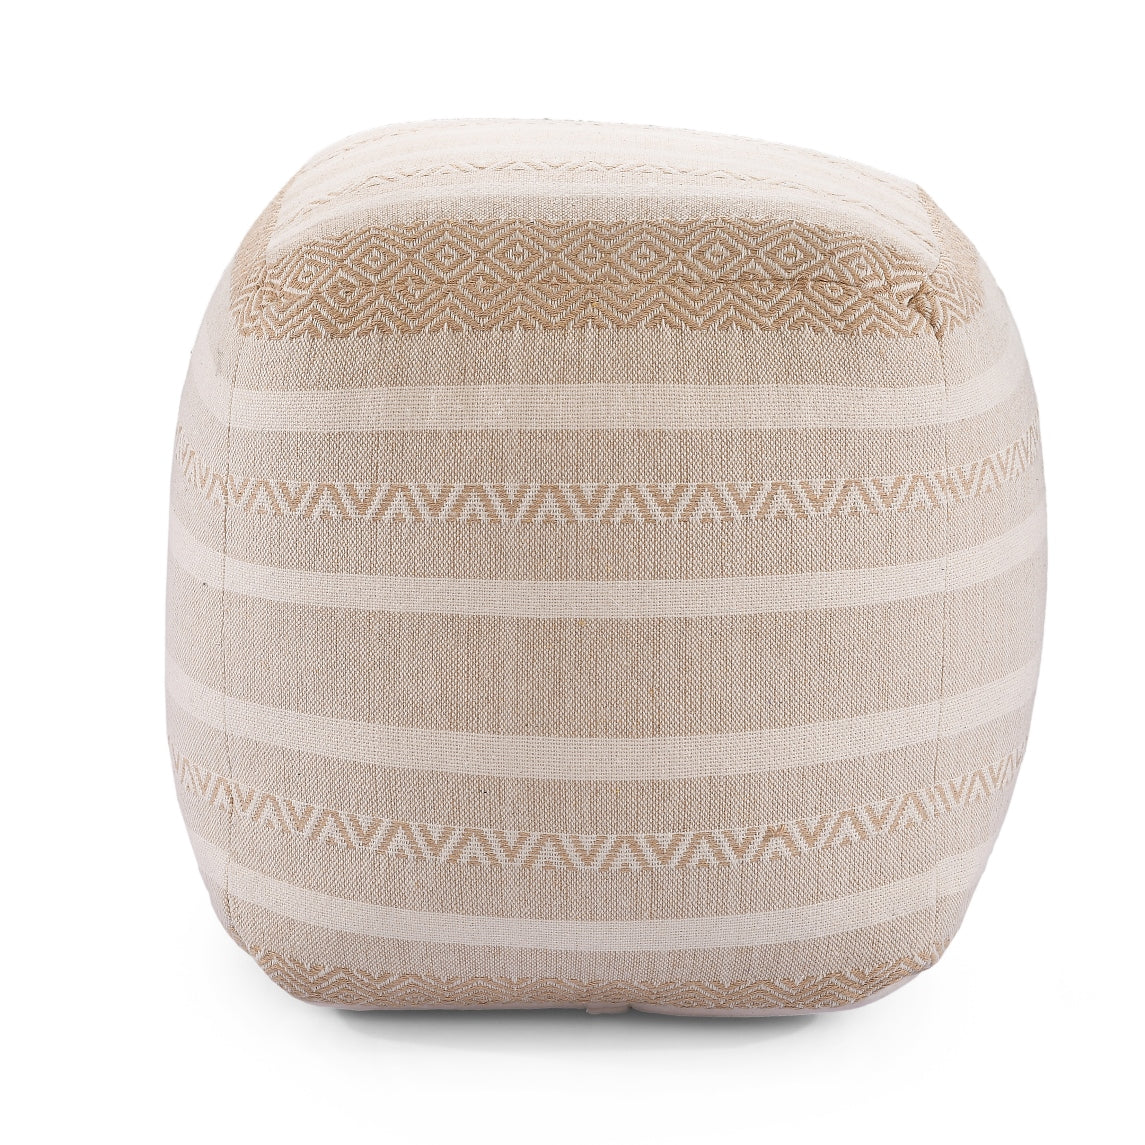 Beige & White Knitted Pouf